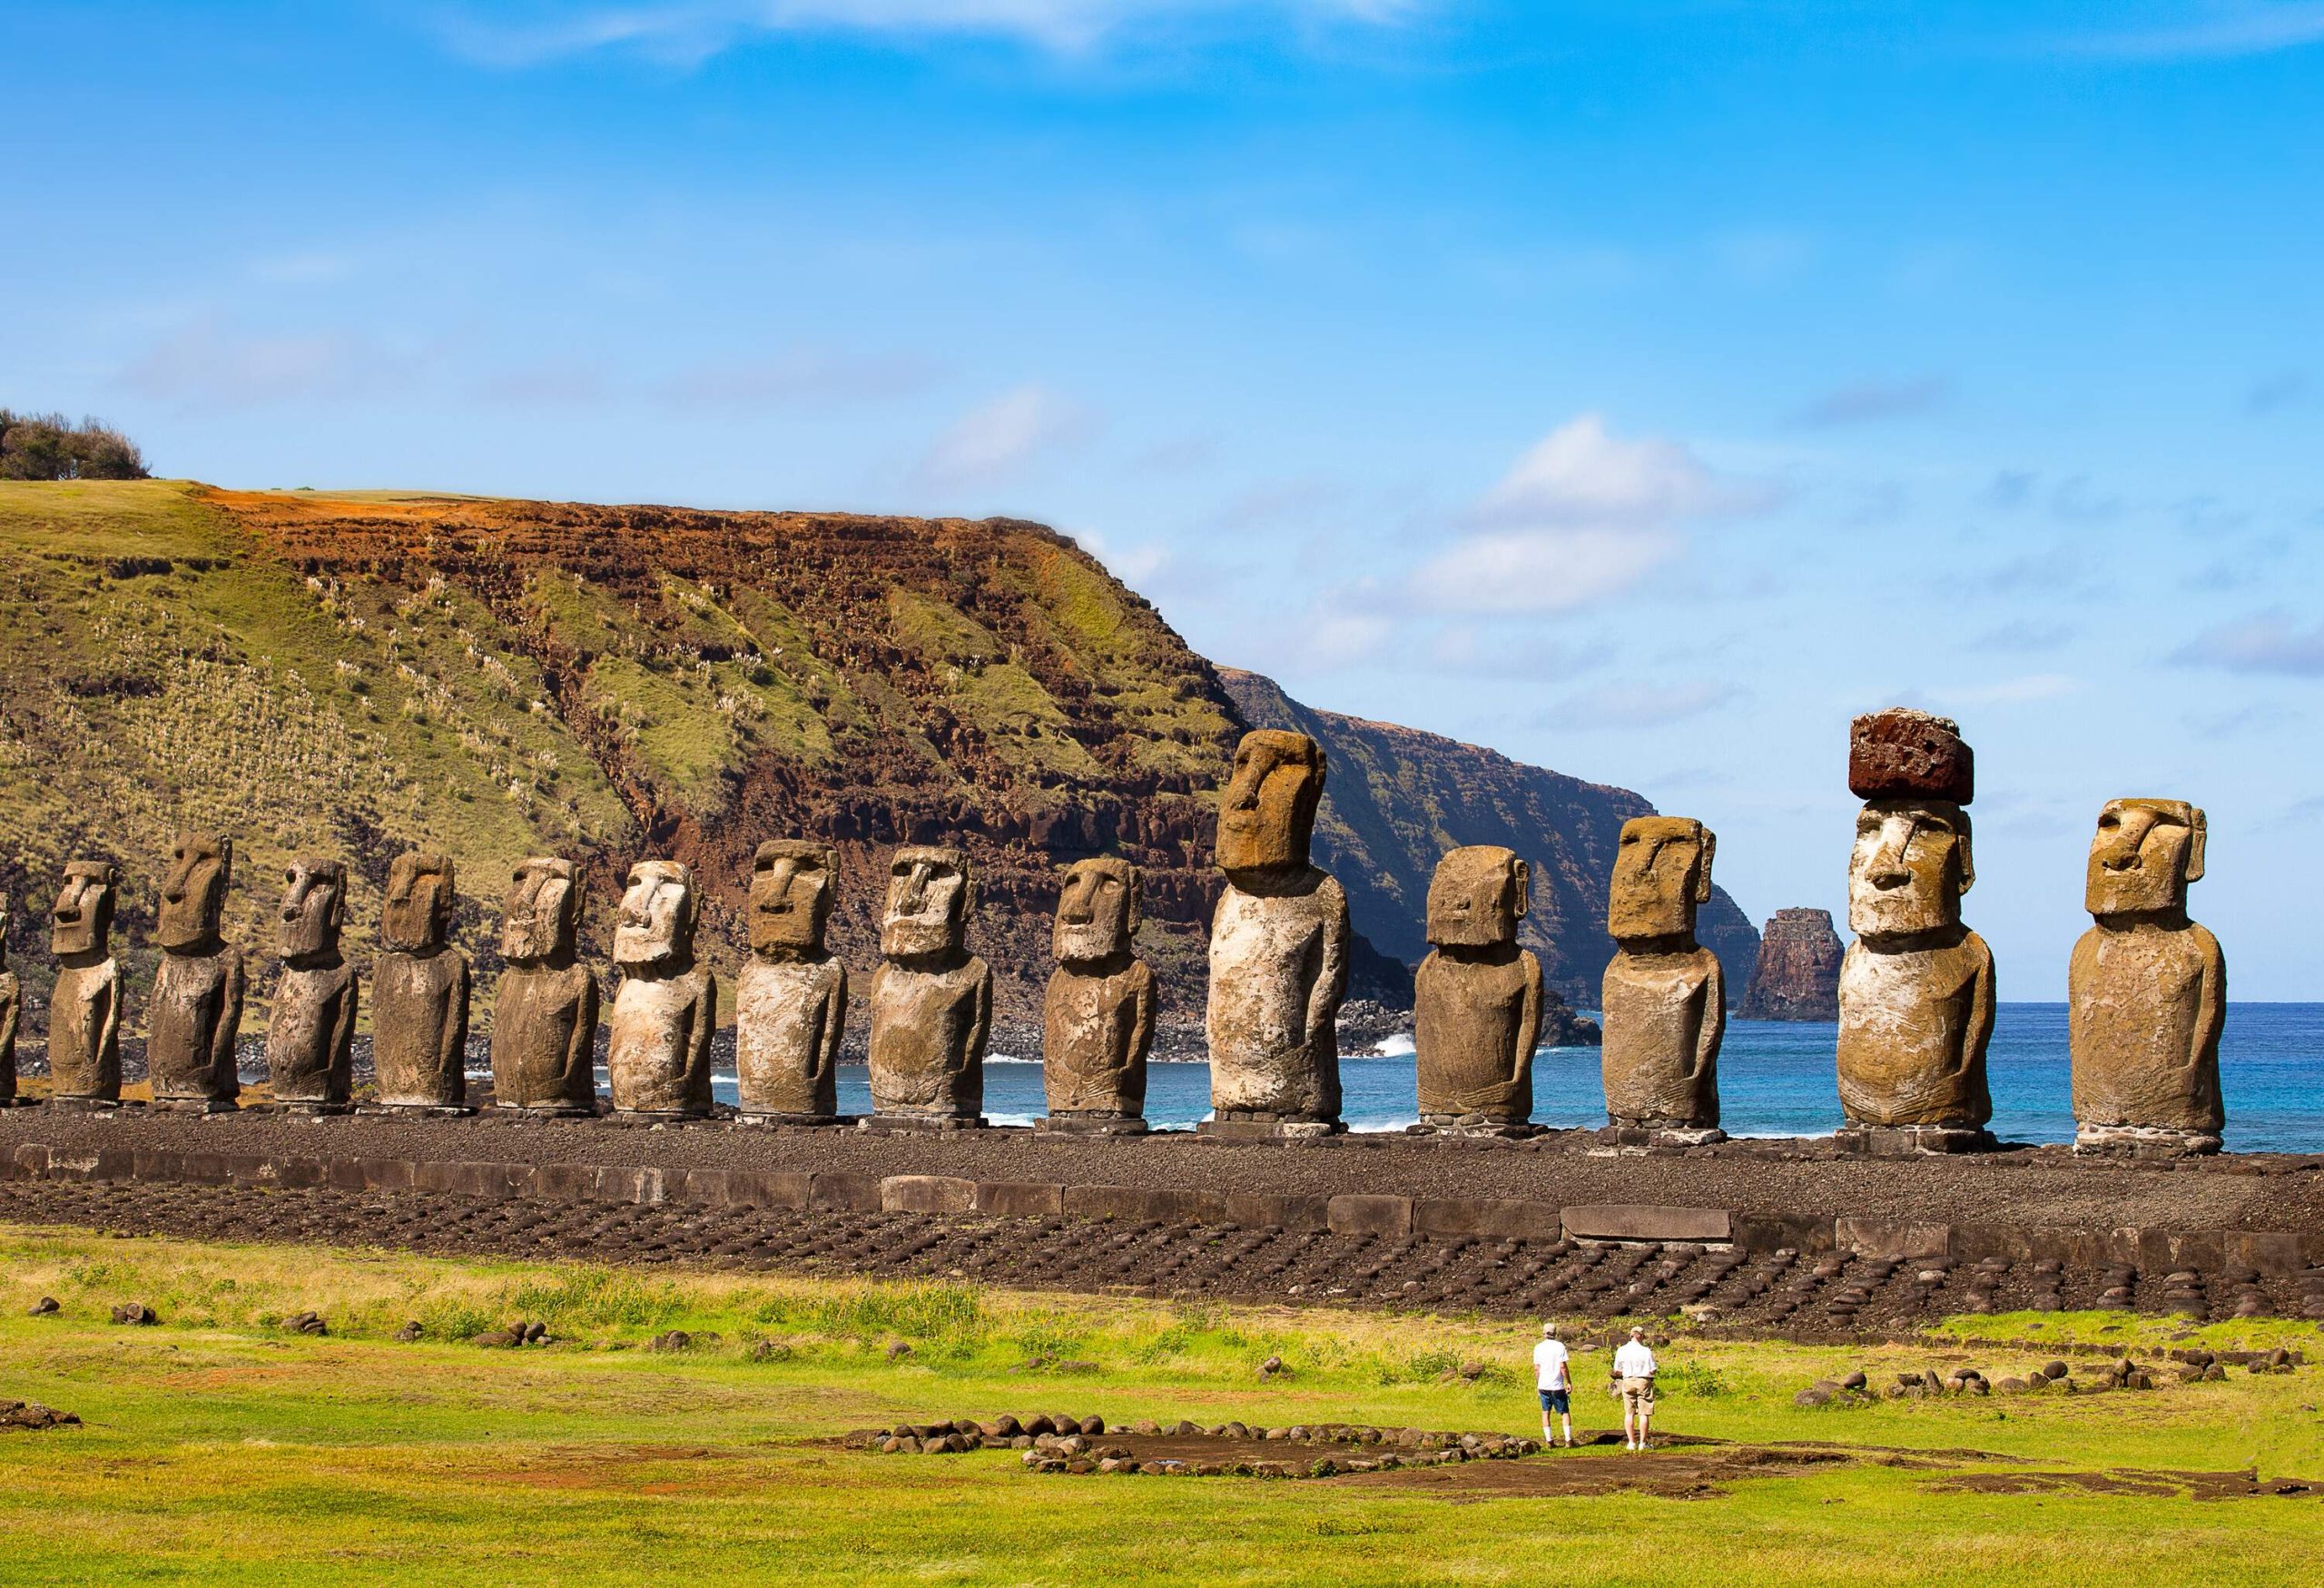 15 majestic Moai statues, gigantic stone sculptures, dominate the scene, with two individuals standing in awe at their bases, while the rugged coastline and a distant coastal cliff provide a dramatic backdrop.